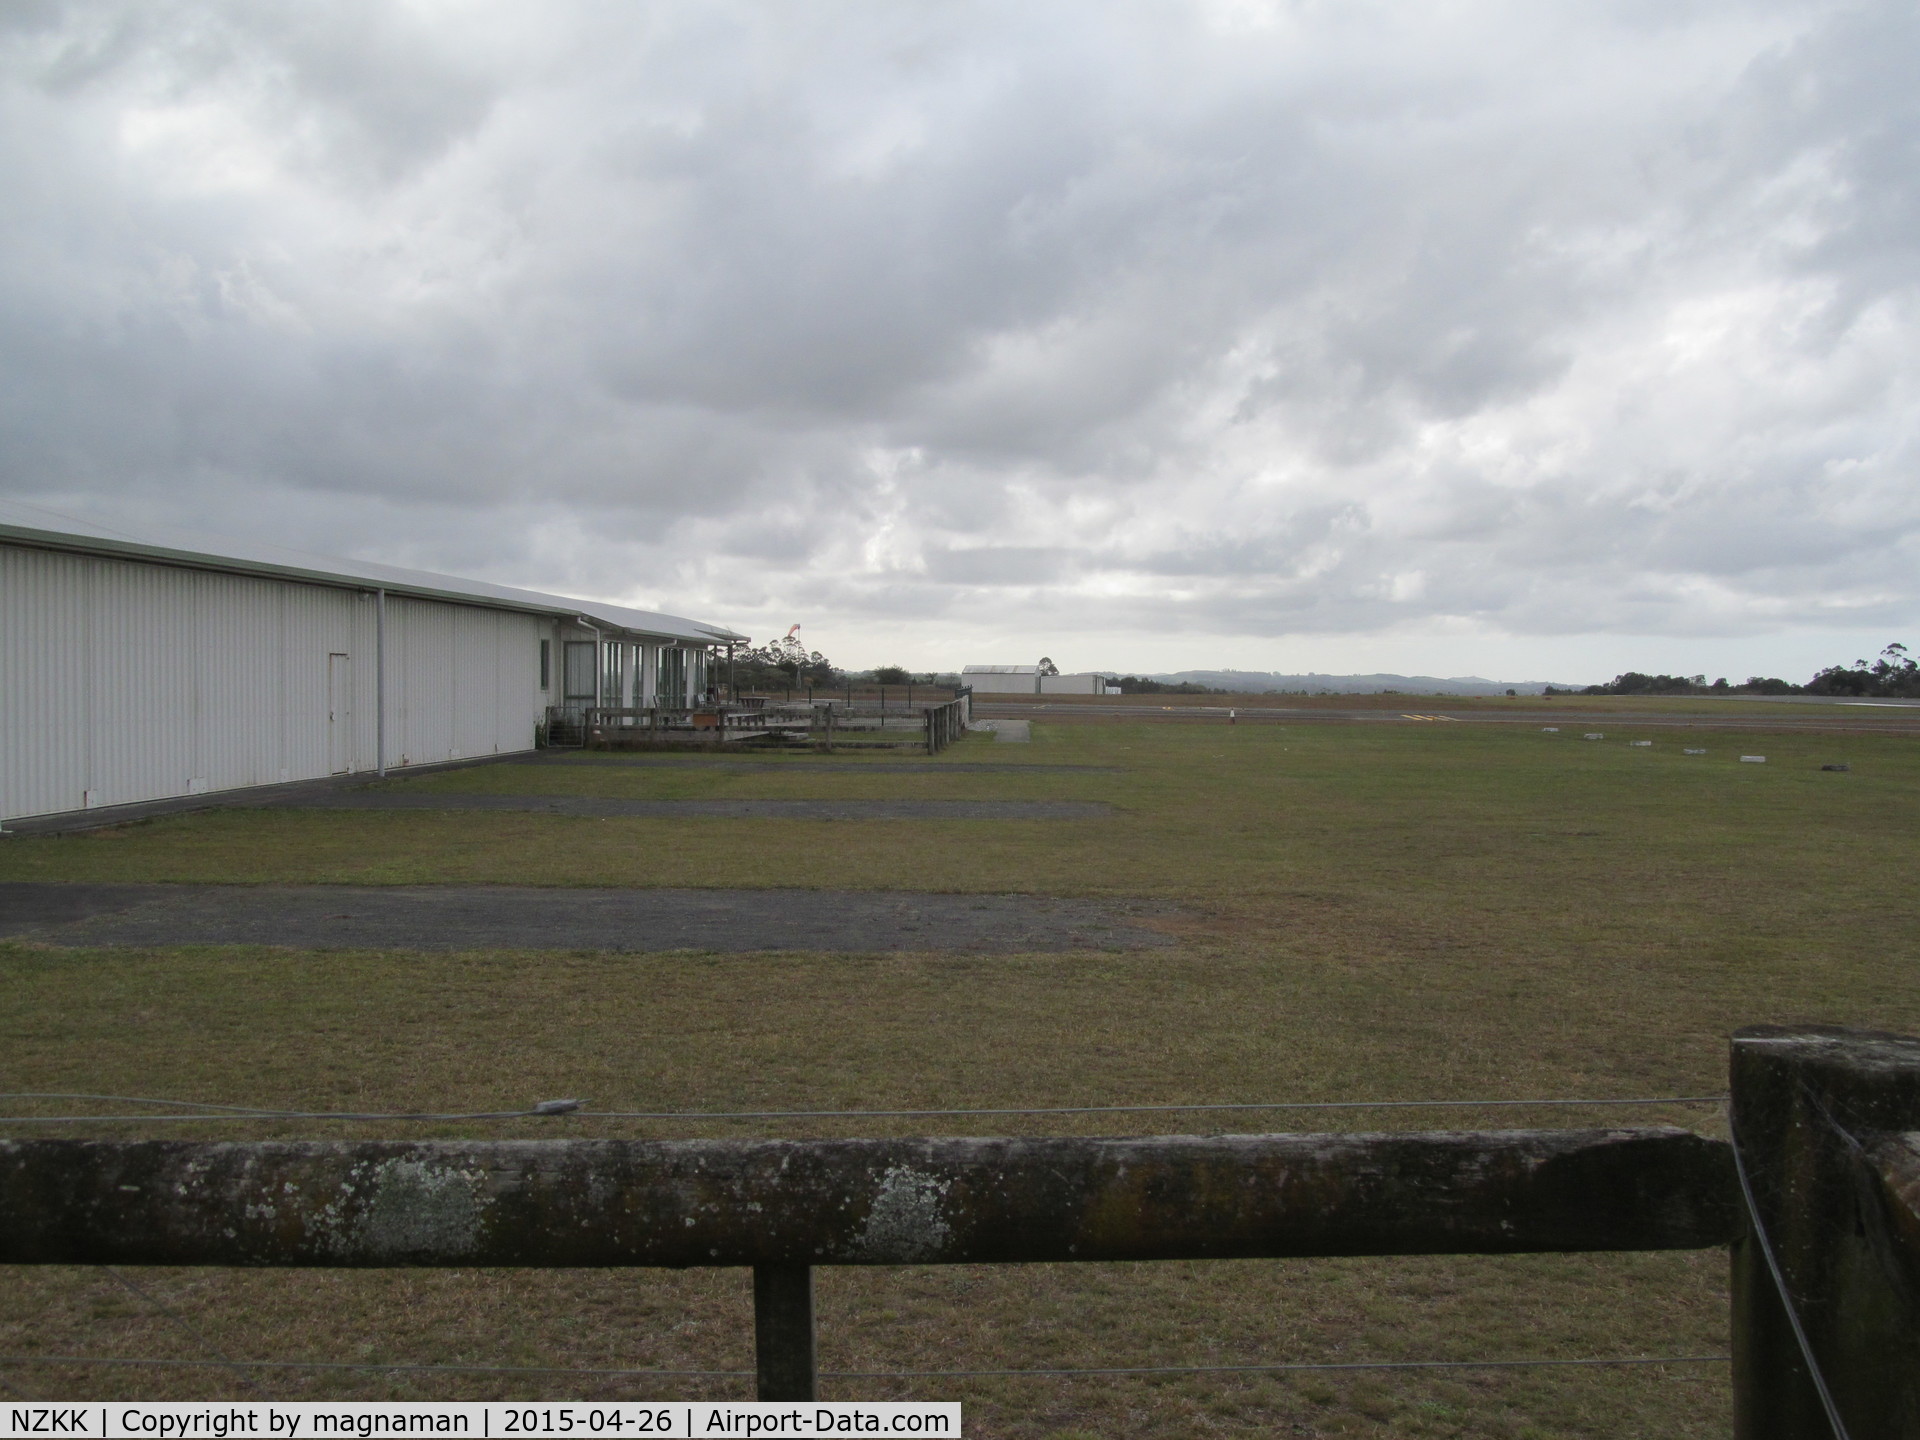 Kerikeri/Bay of Islands Airport, Kerikeri / Bay of Islands New Zealand (NZKK) - View of local hangar and terminal outdoor area. This airfield is most common first or last stop for light aircraft being imported or exported by air from new Zealand.